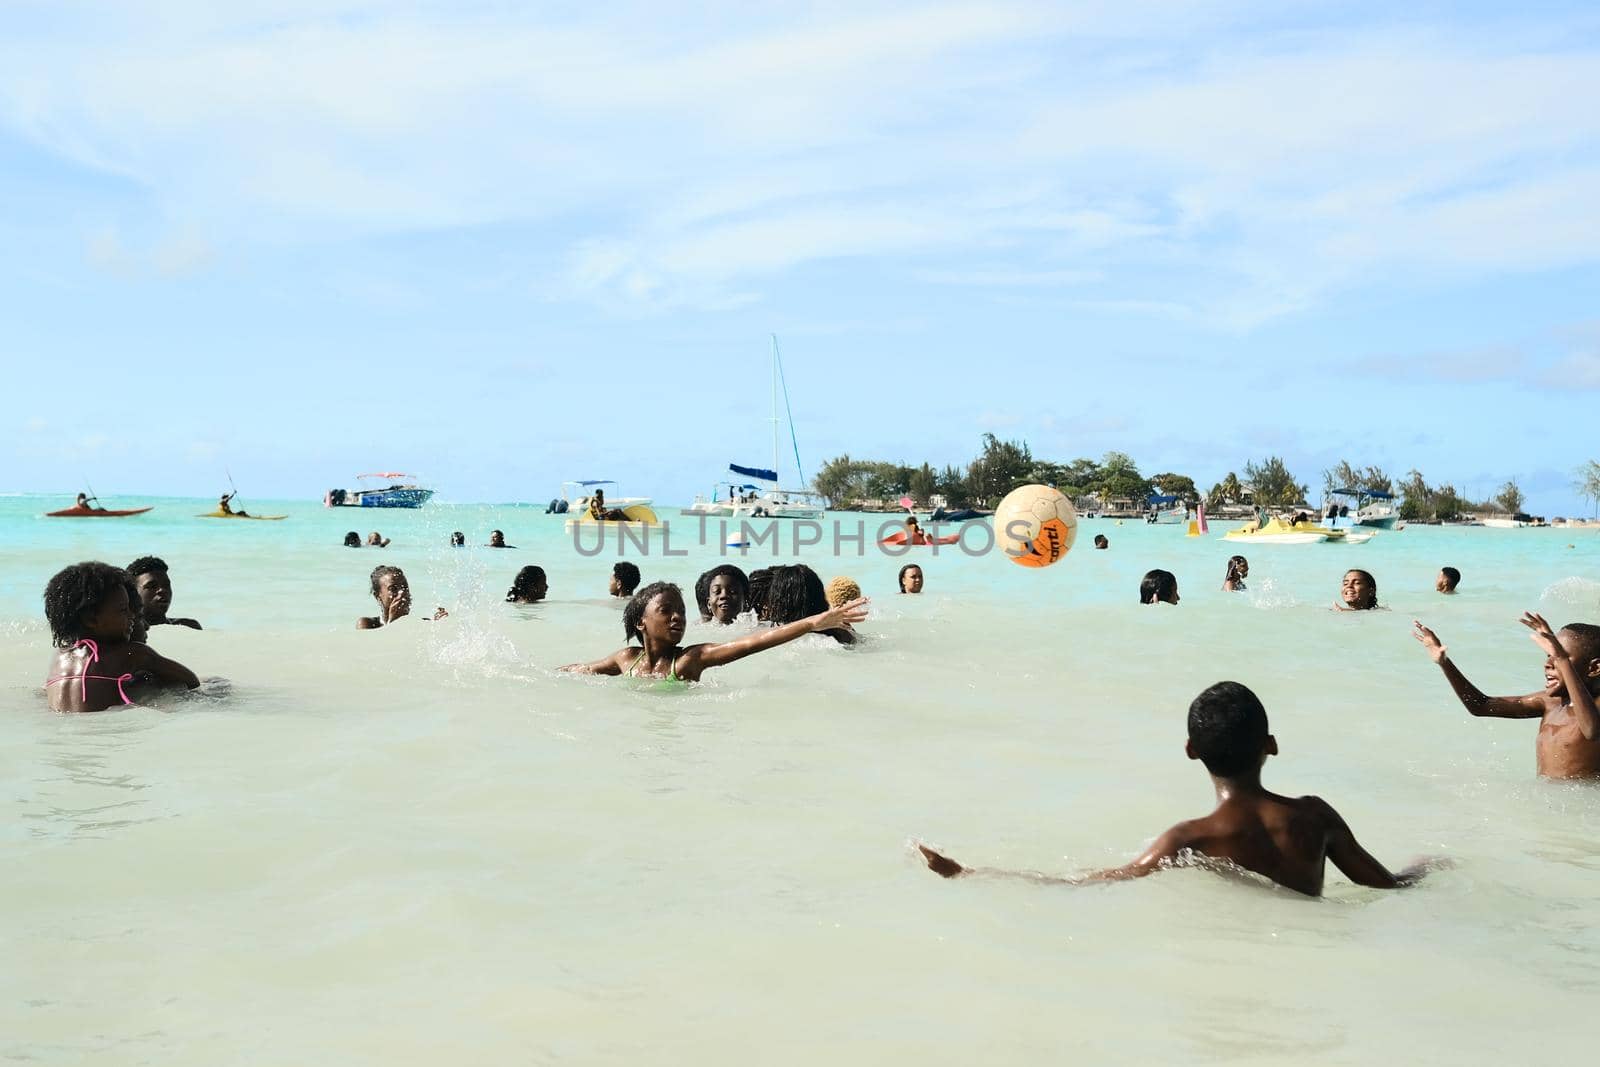 December 8, 2019 Mauritius Island, locals swim in the Indian Ocean and play with a ball.